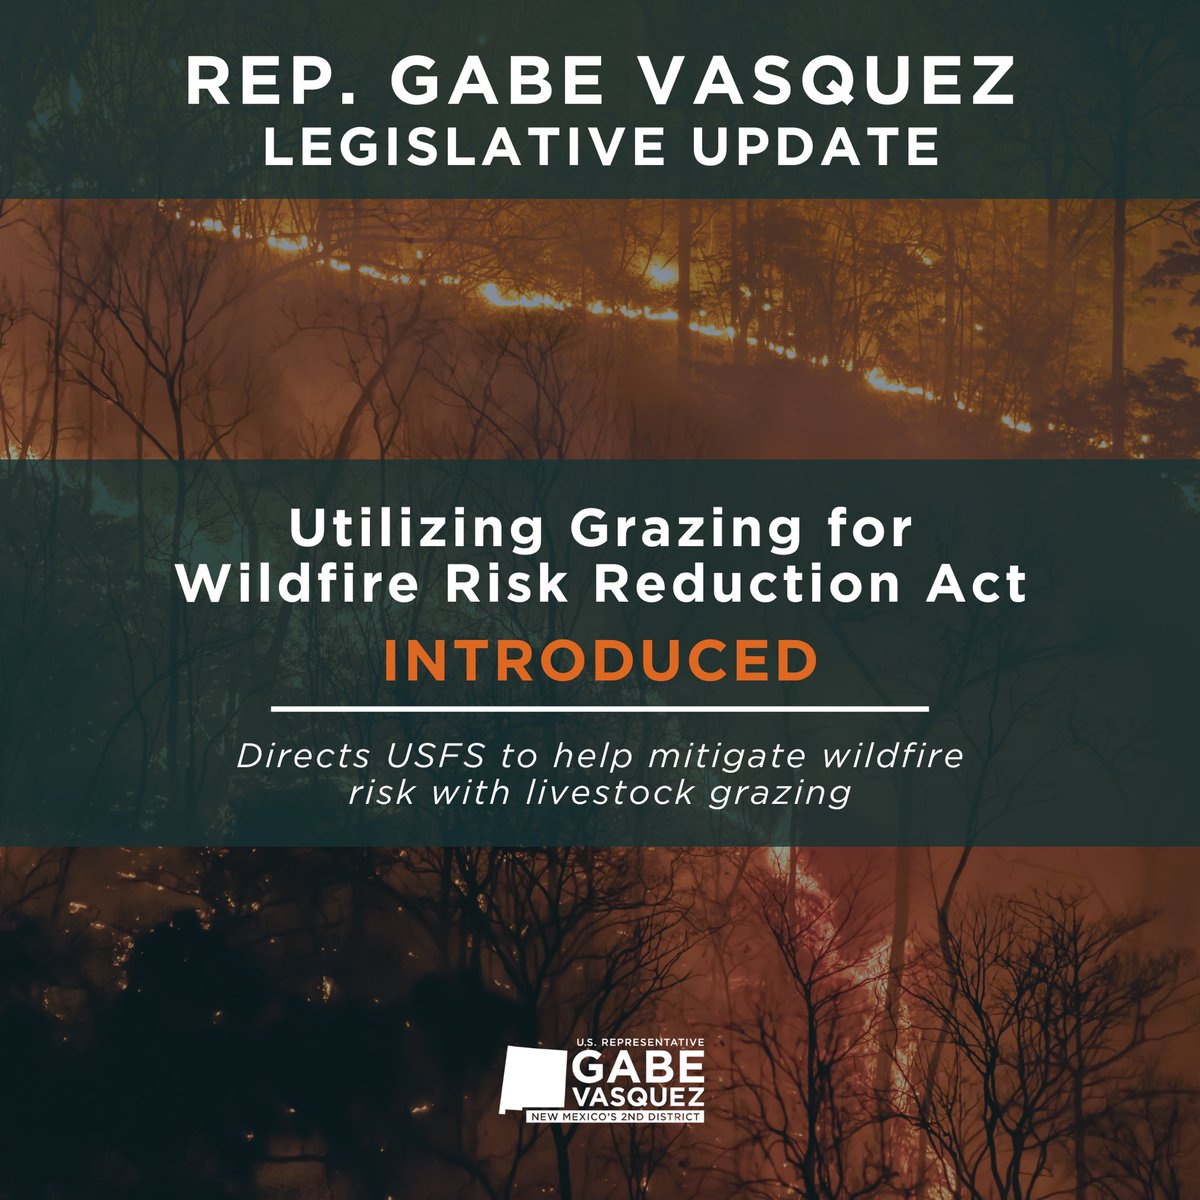 As New Mexicans, we understand how catastrophic wildfires can be. That's why I'm focused on proactive measures to keep our communities safe. My new bipartisan bill, the Utilizing Grazing for Wildfire Risk Reduction Act directs the U.S. Forest Service to use all the tools in its